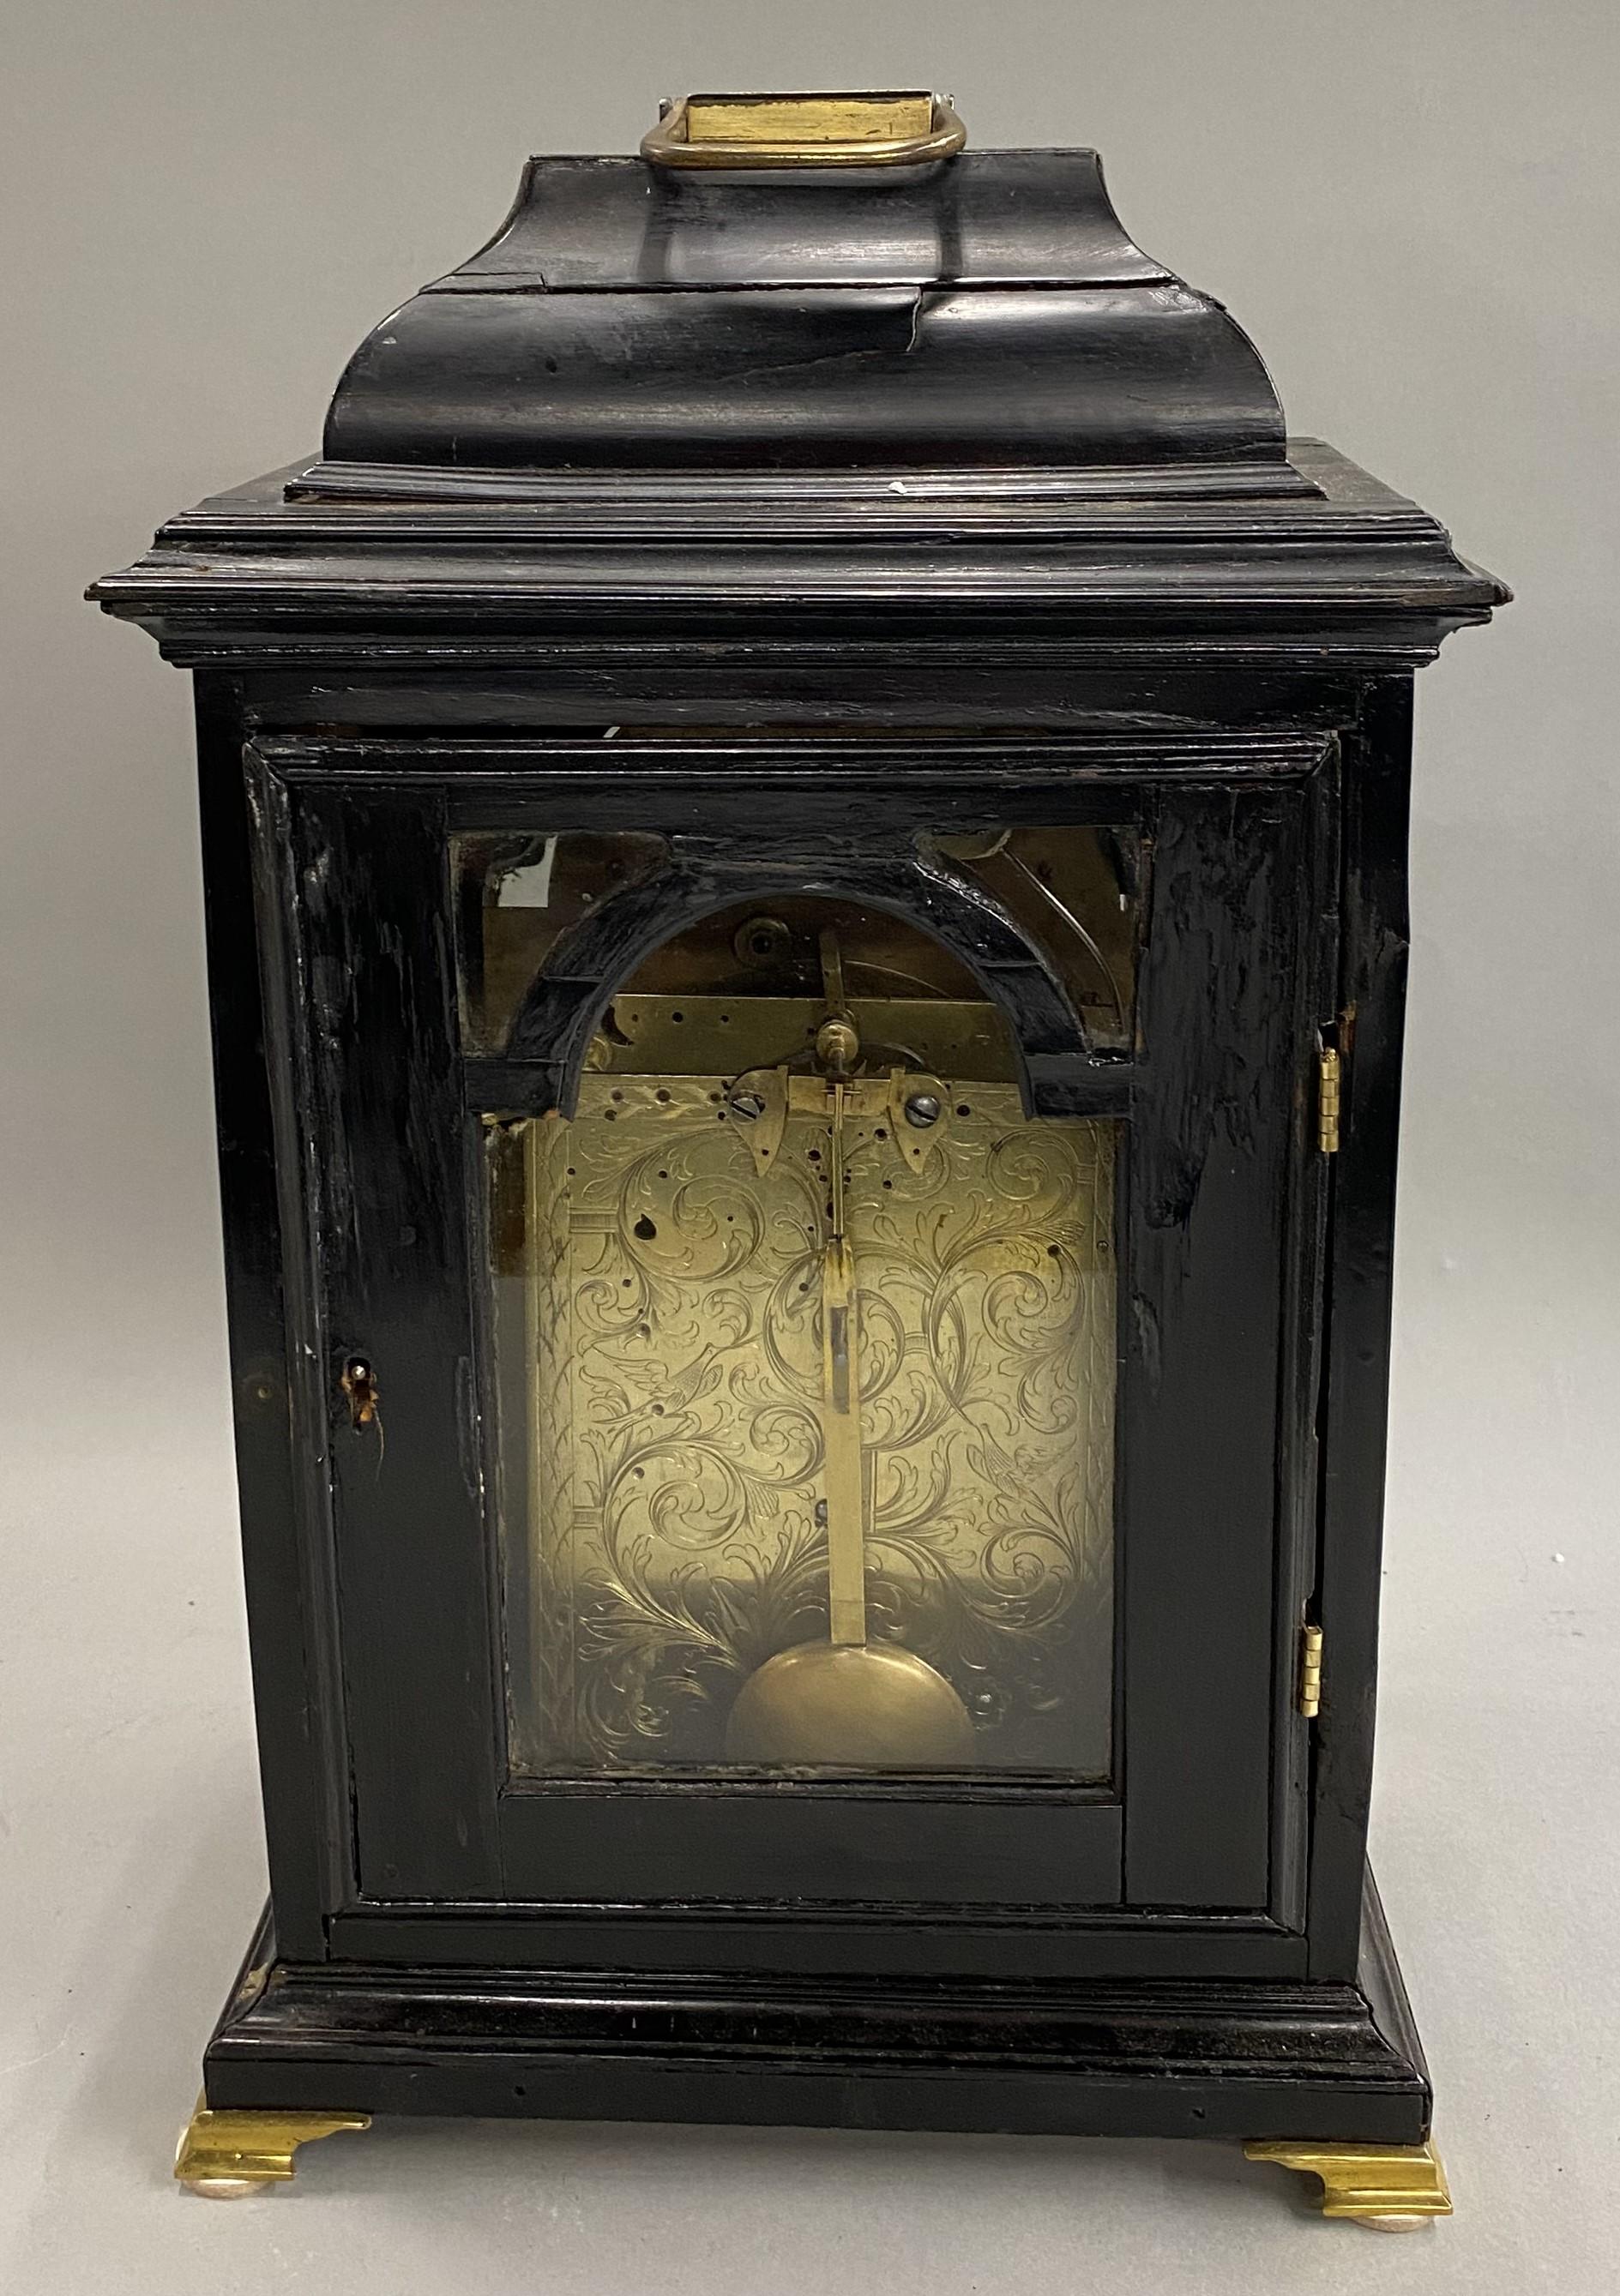 George II Edward Browne of Norwich Bracket Clock in Ebonized Mahogany Case In Good Condition For Sale In Milford, NH